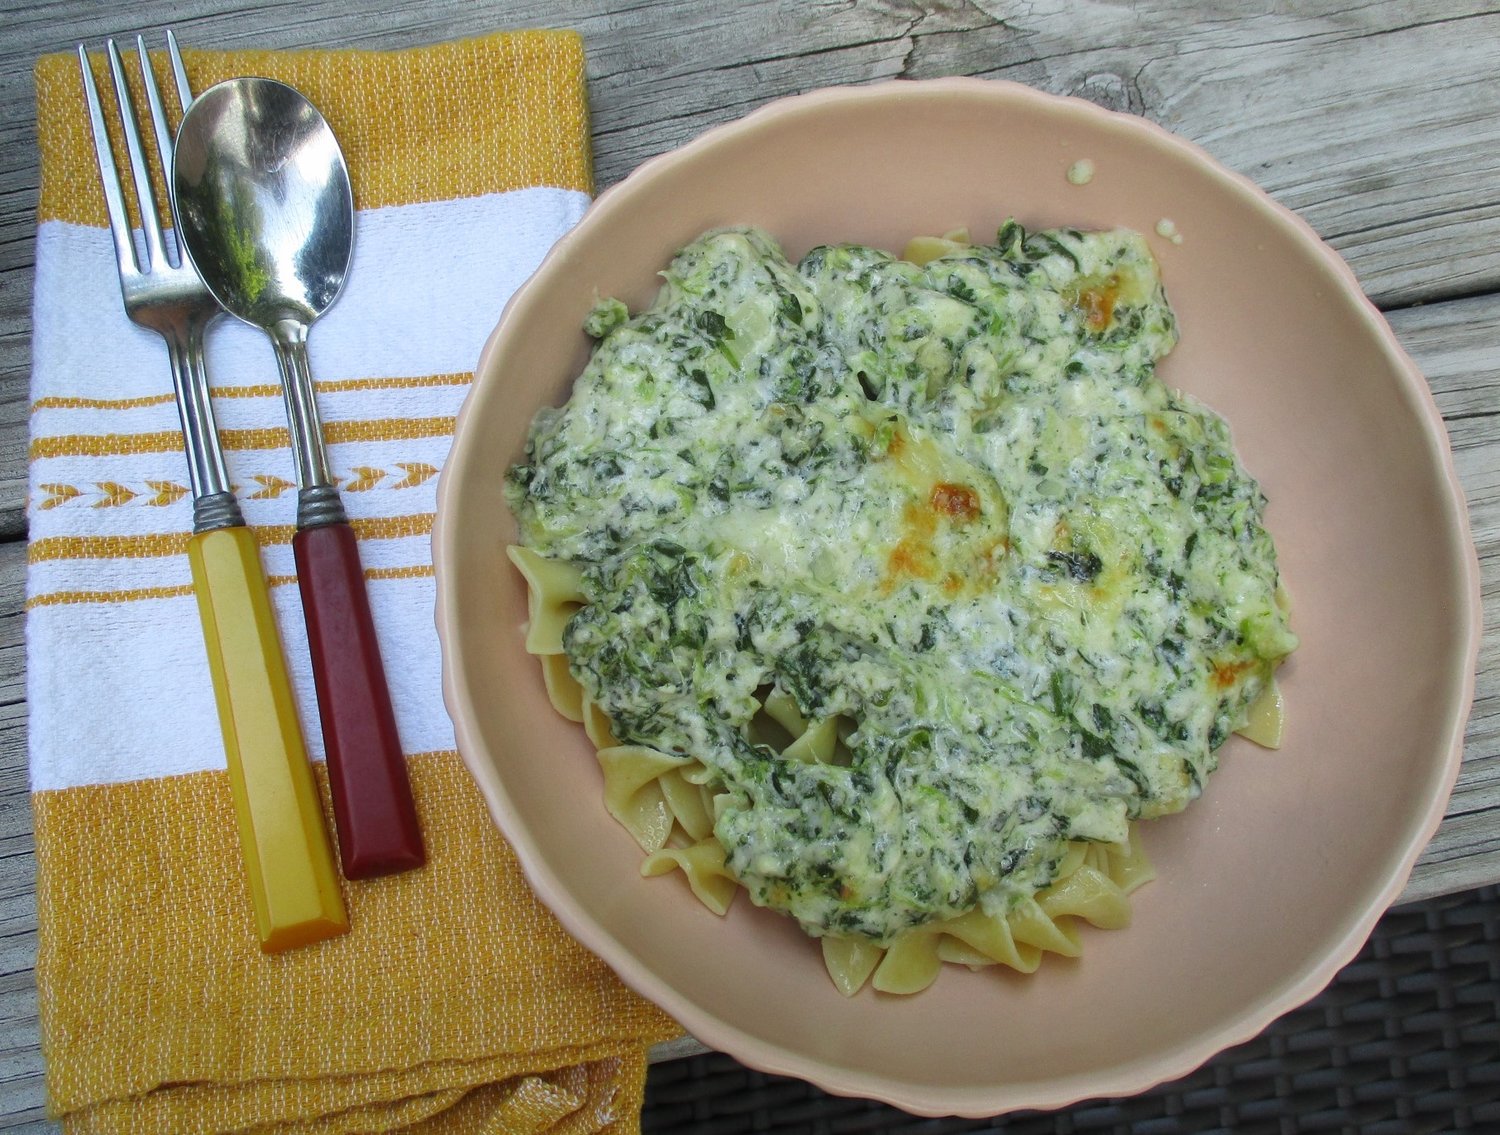 Cheesy creamed spinach on egg noodles.